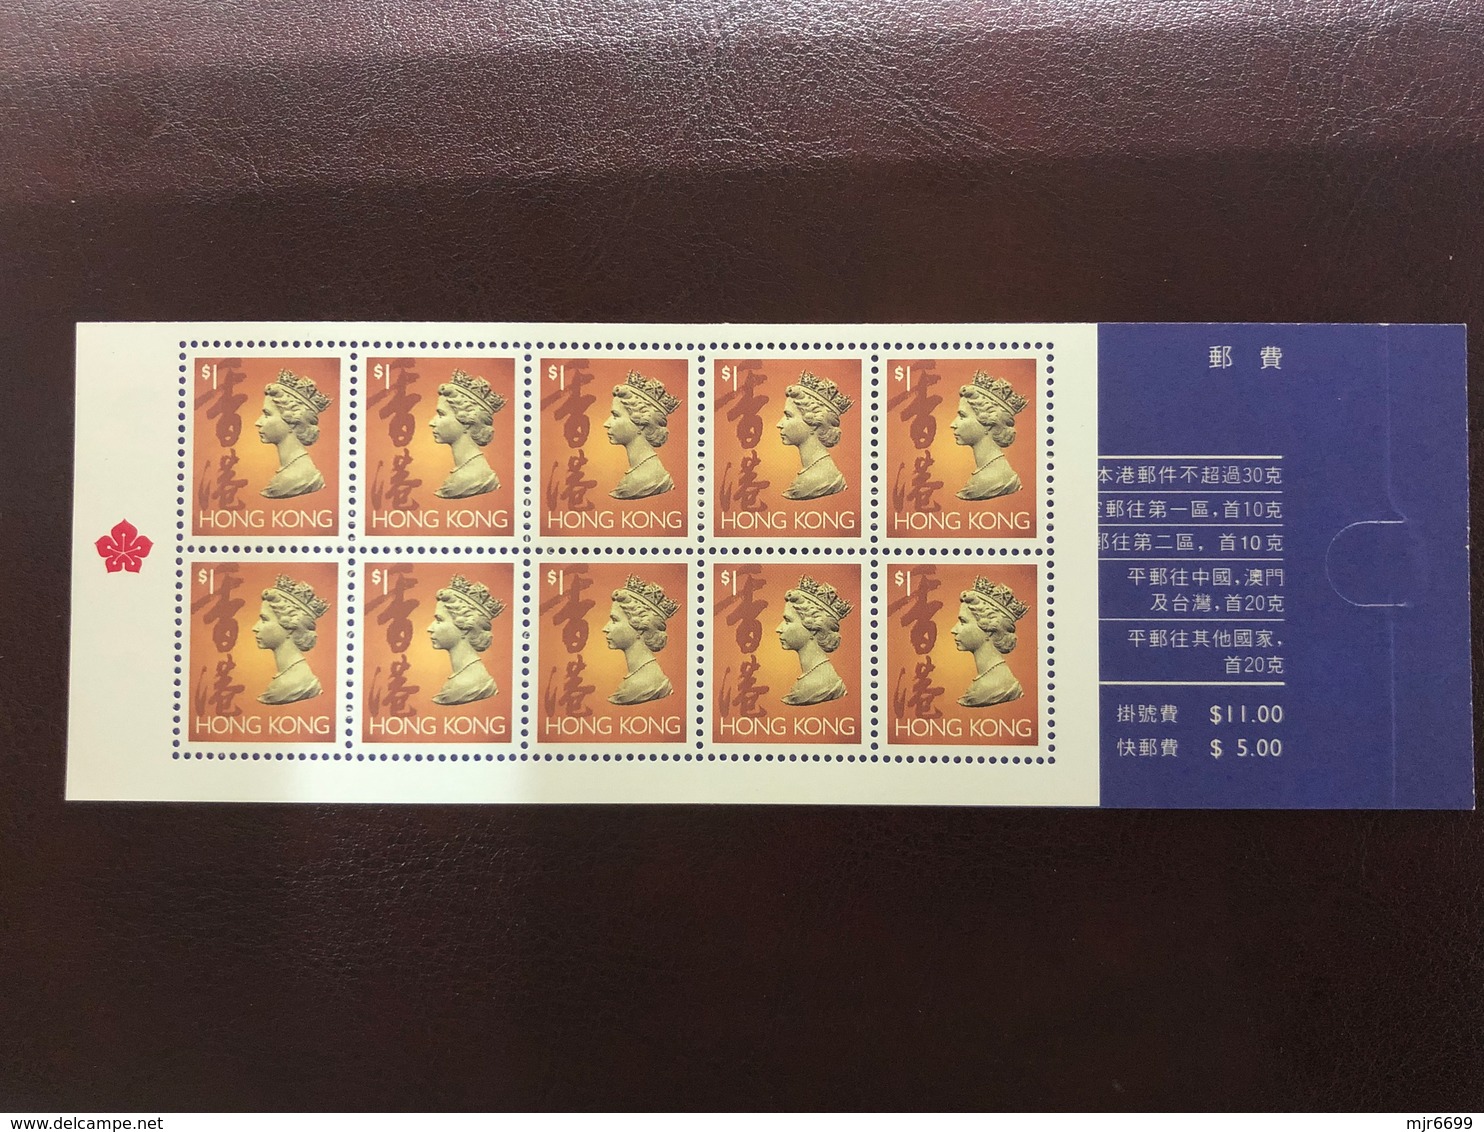 HONG KONG QUEEN'S HEAD TYPE 1.00$ X 10 STAMPS. (2 BOOKLETS) 1 BOOKLET WITH VERY LIGHT YELLOW STAINS OTHER VERY FINE. - Booklets